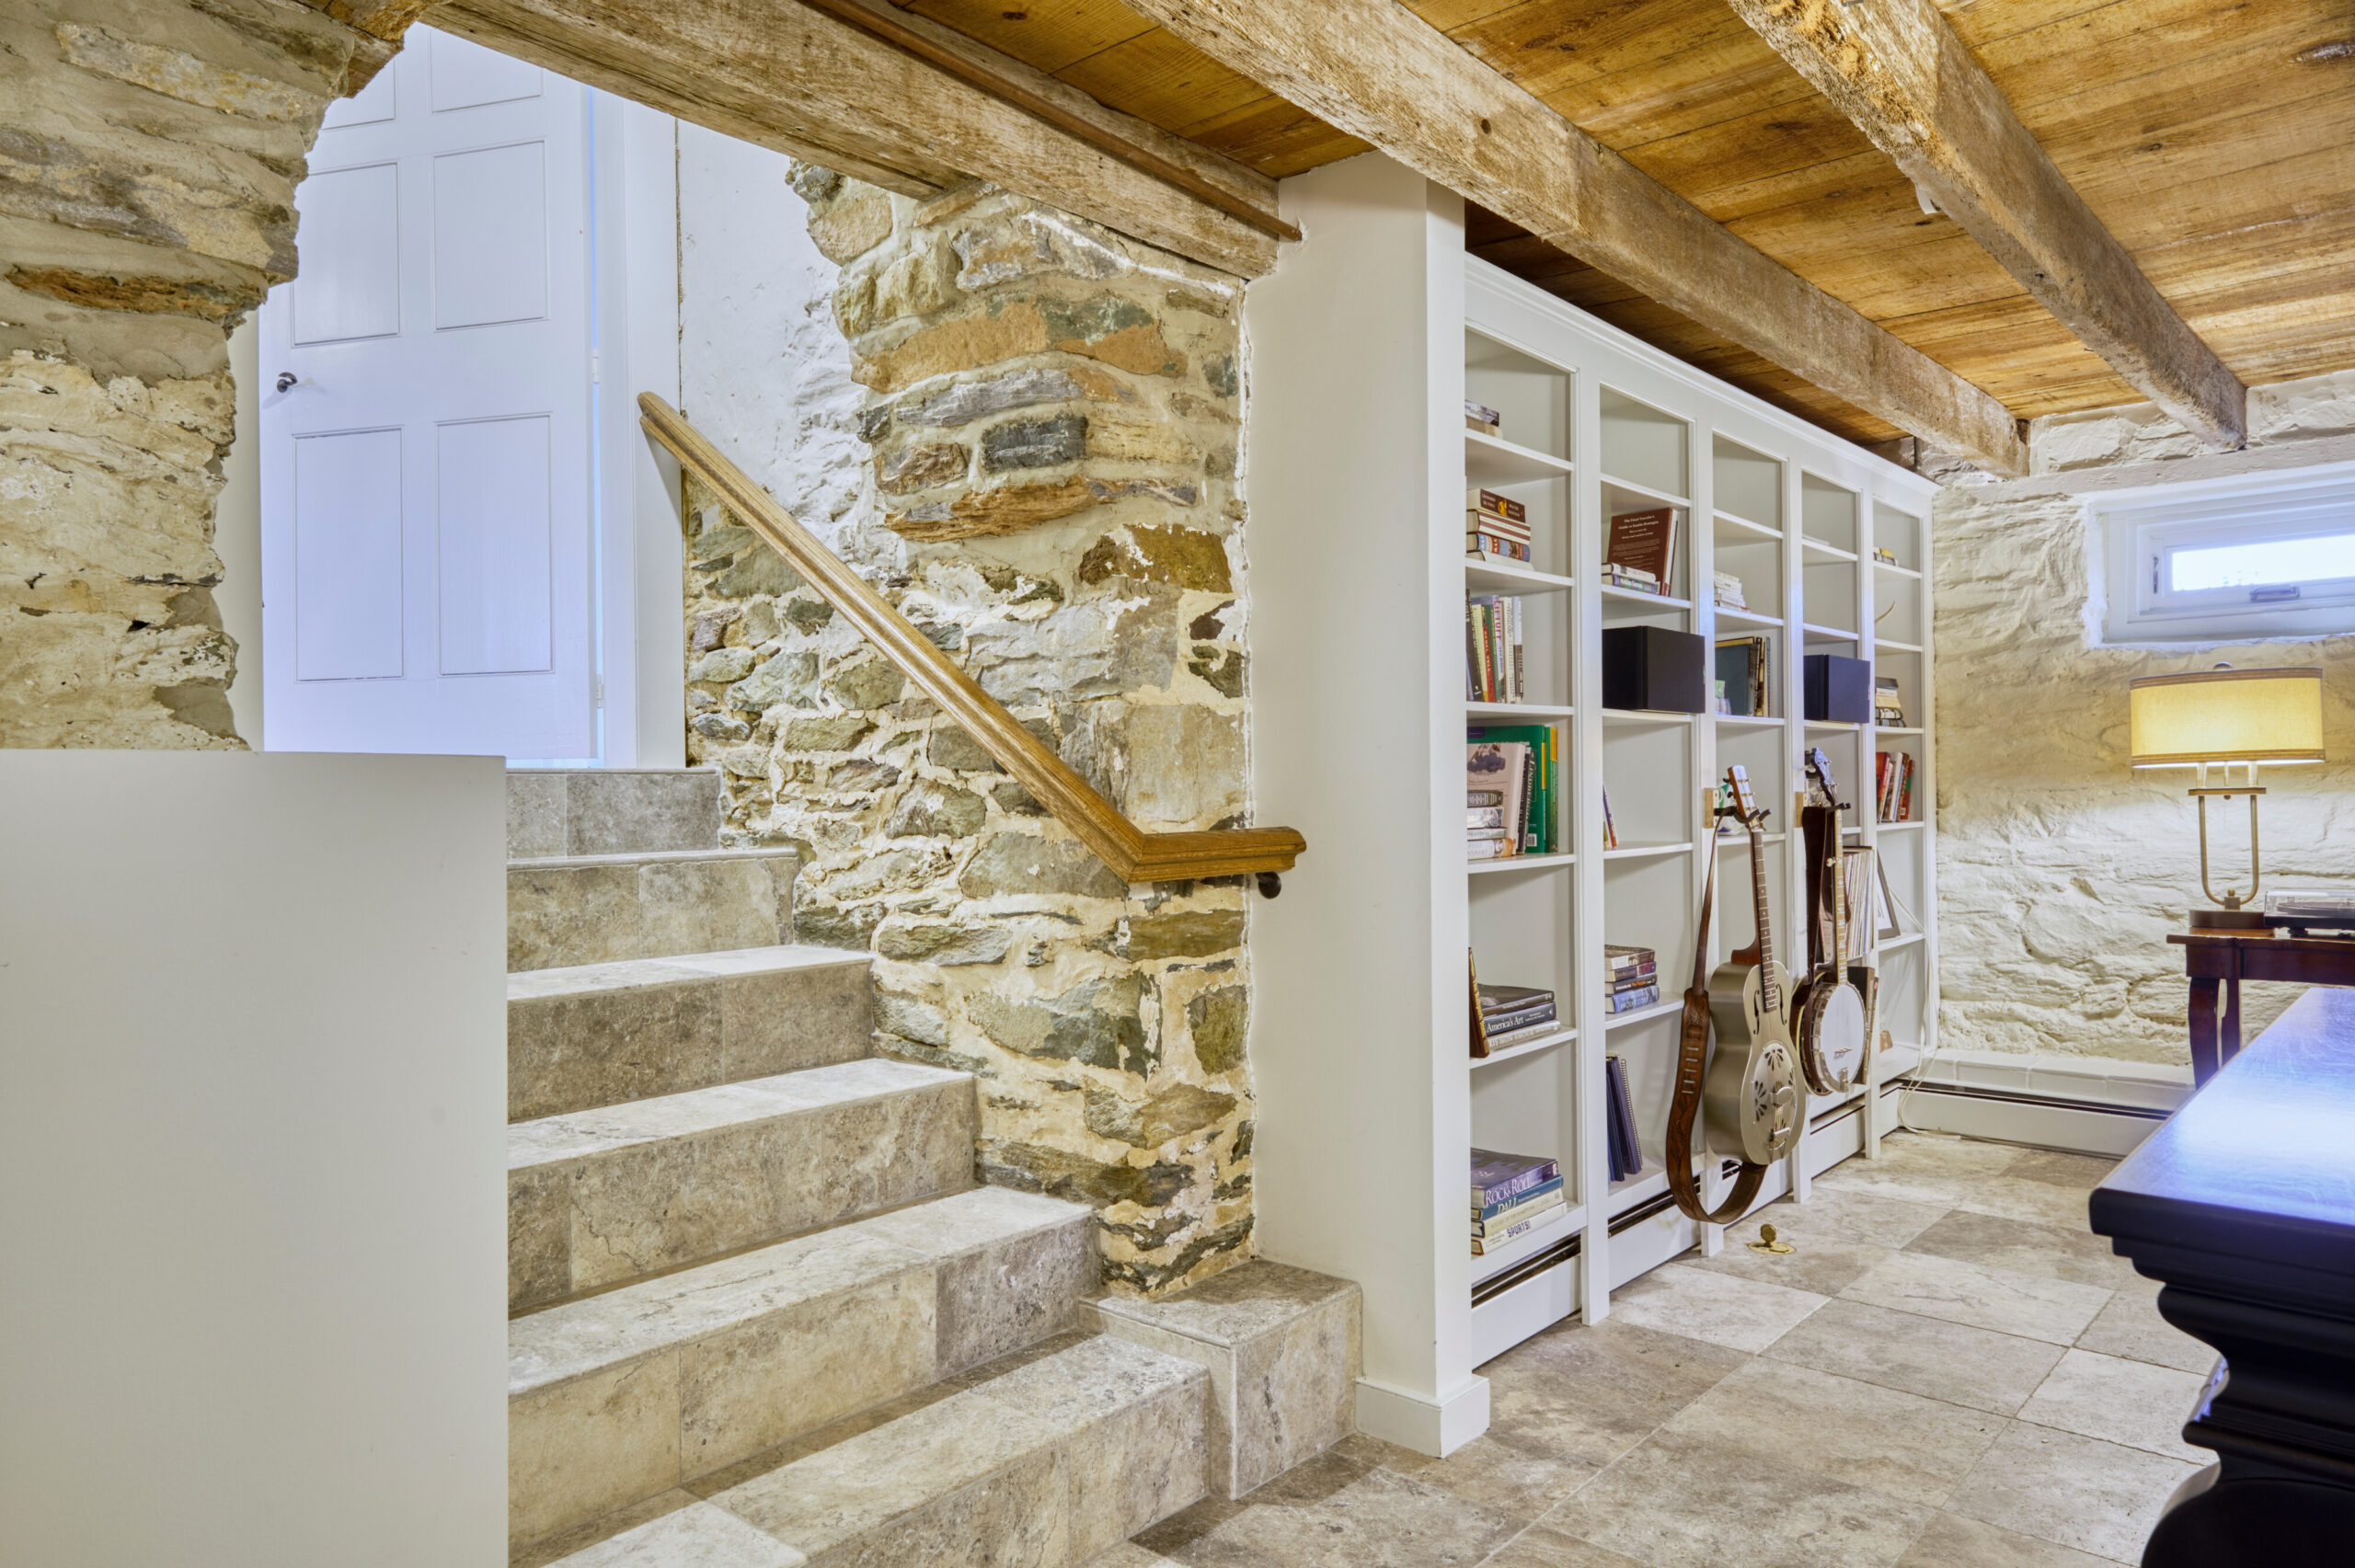 Professional interior photo of main house of Historic Hearthstone Manor: 35428 Appalachian Trail Rd, Round Hill, Virginia - showing short stone staircase to finished basement sitting room with built-in bookshelves